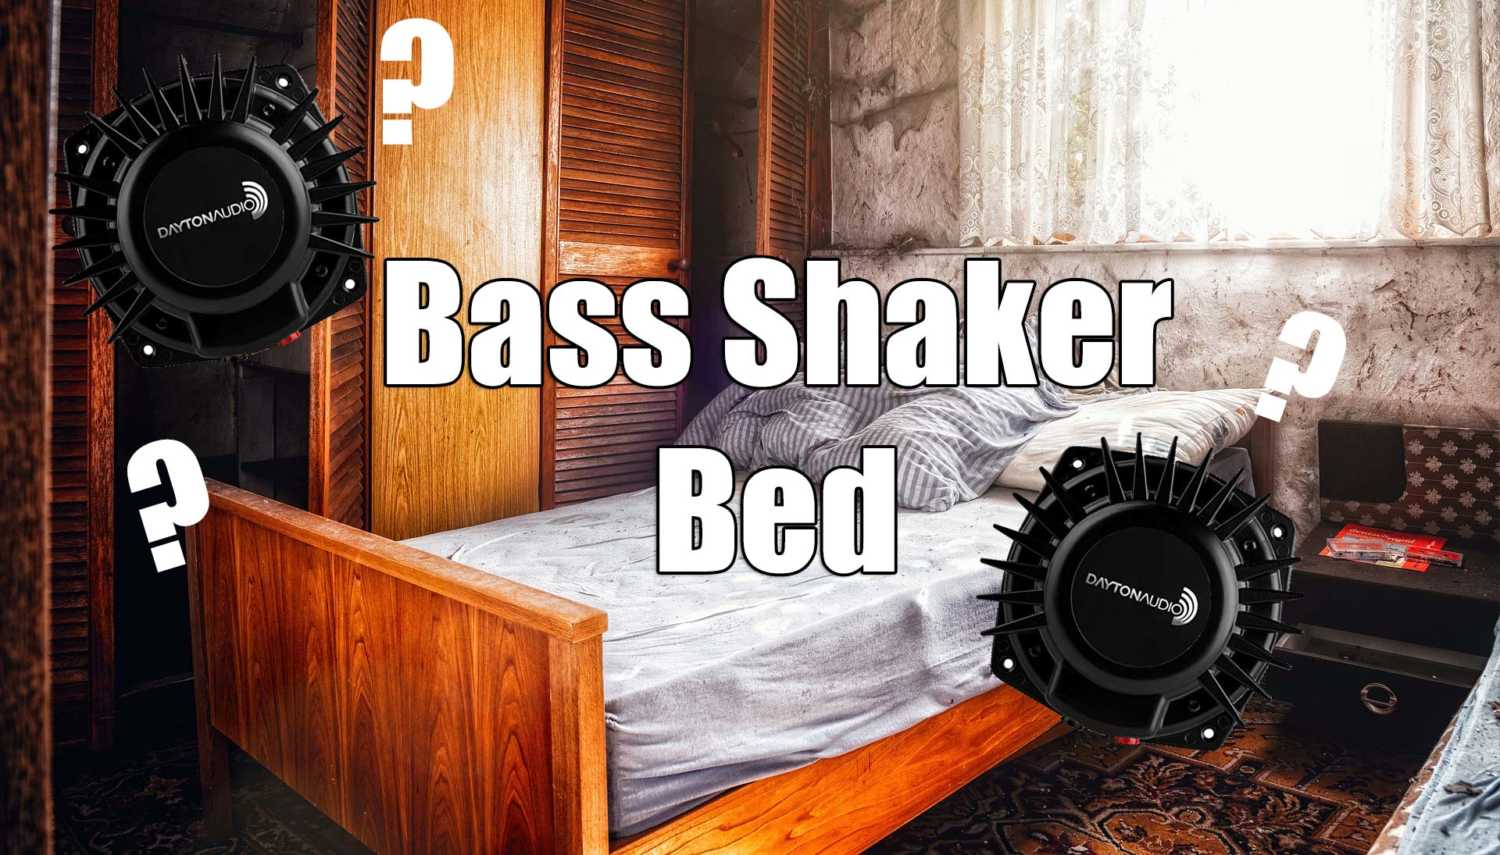 Attaching Bass Shakers To a Bed Image